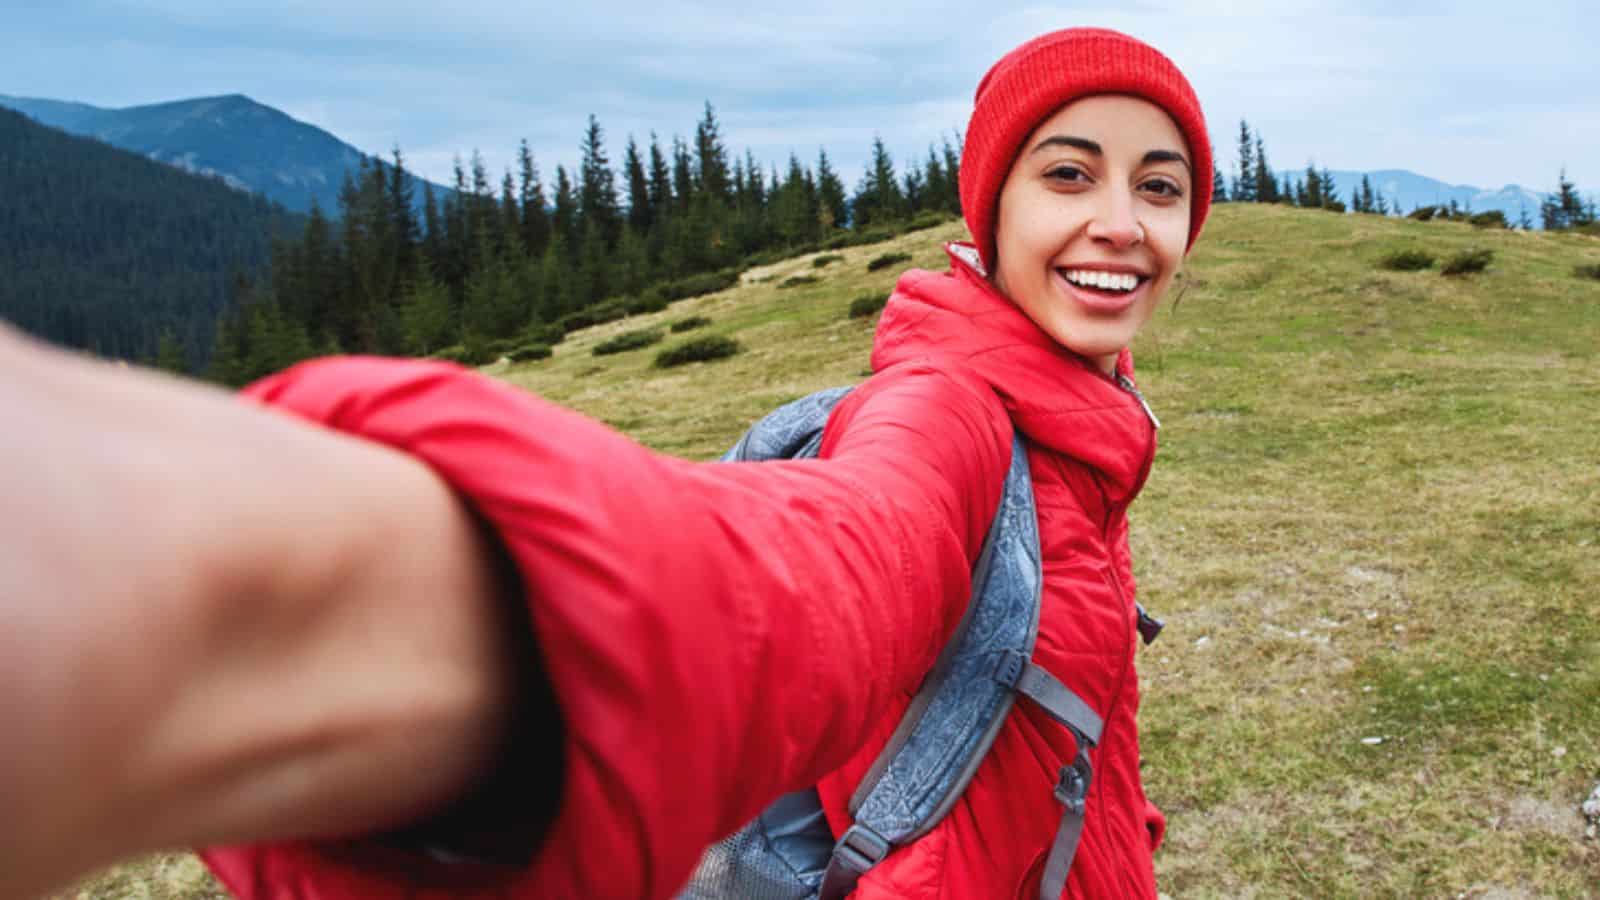 Selfie image of a young smiling woman hiker with small backpack